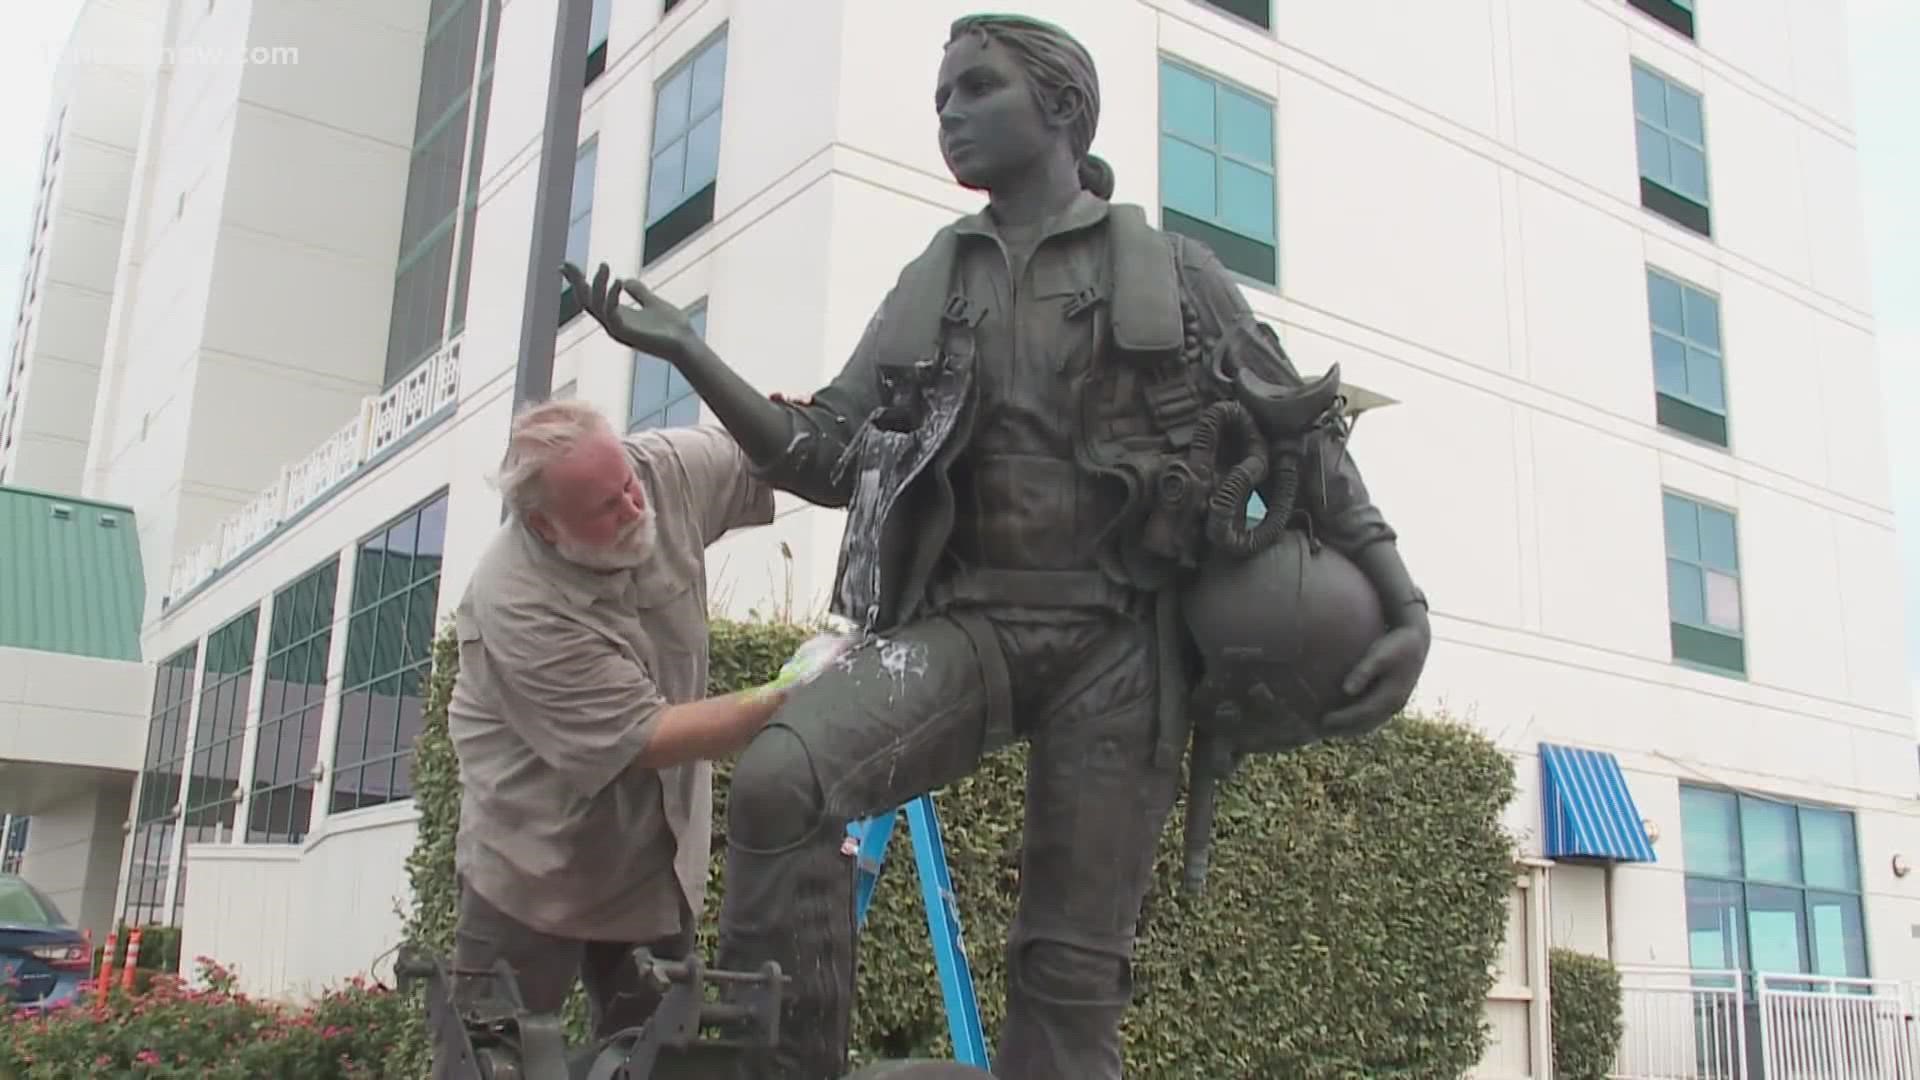 The Naval Aviation Monument's bronze statues are beginning to suffer from corrosion. Work has begun to preserve them.